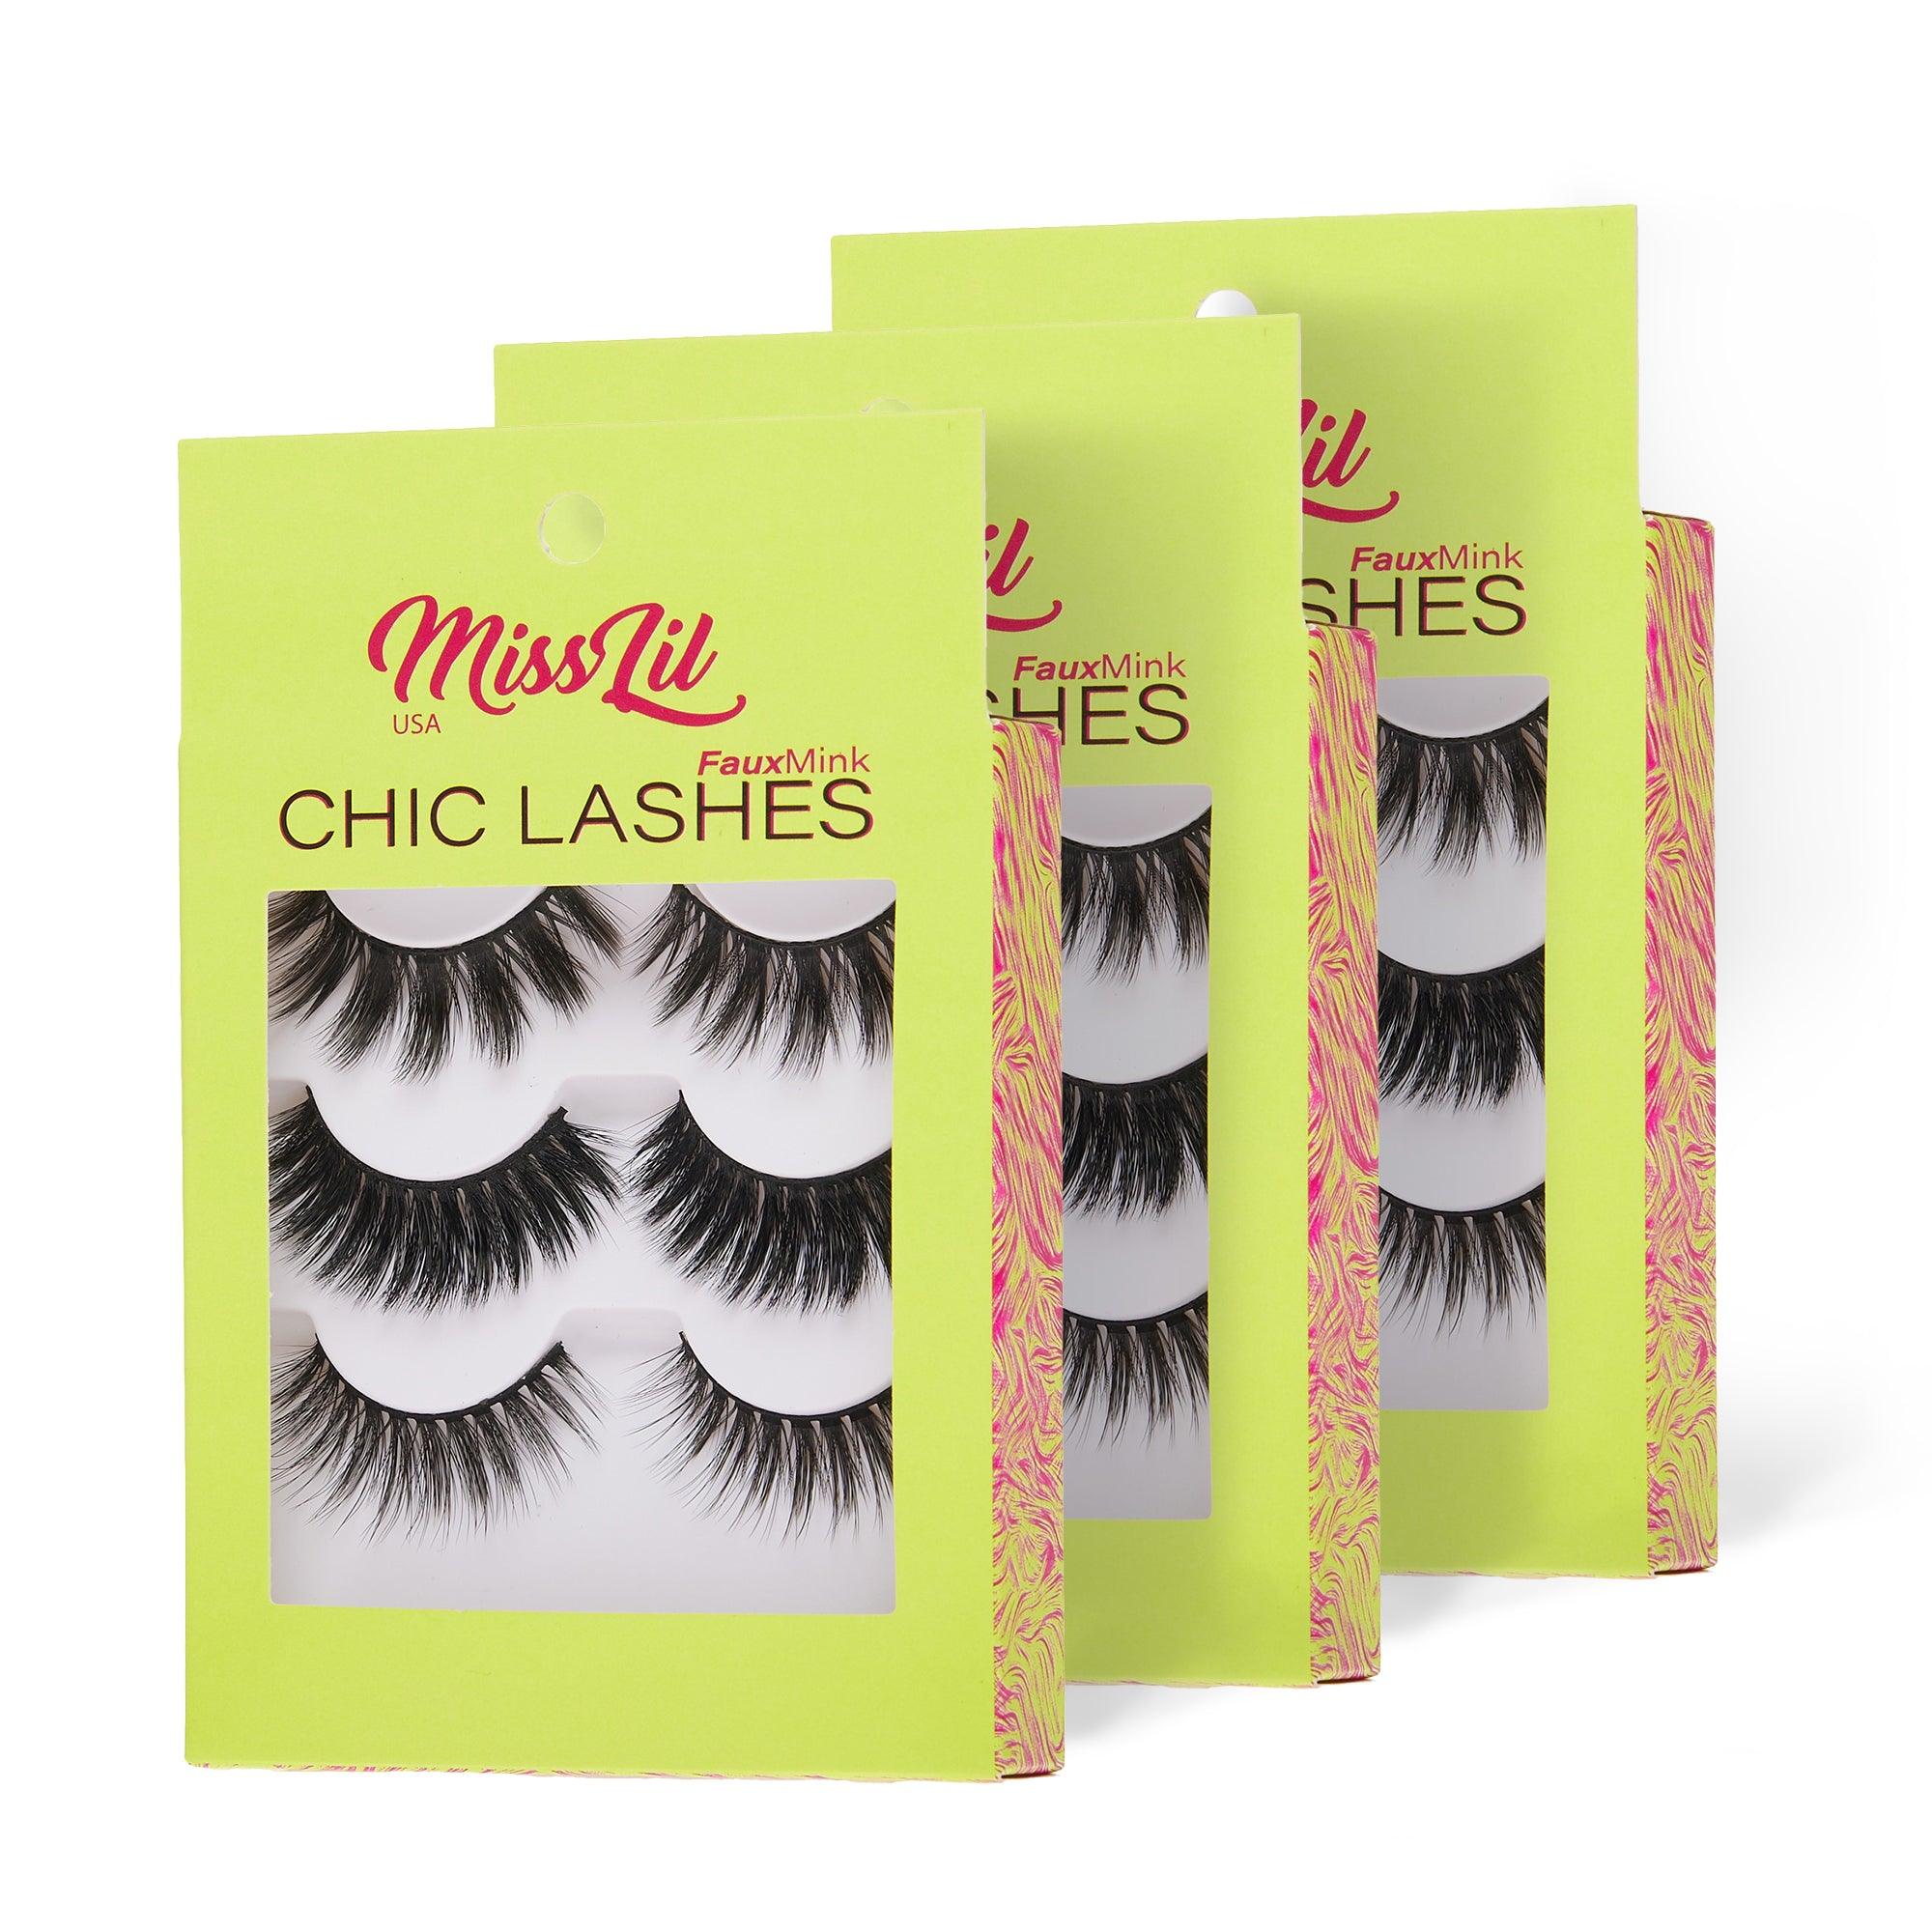 3-Pairs Lashes-Chic Lashes Collection #27 (Pack of 12) - Miss Lil USA Wholesale